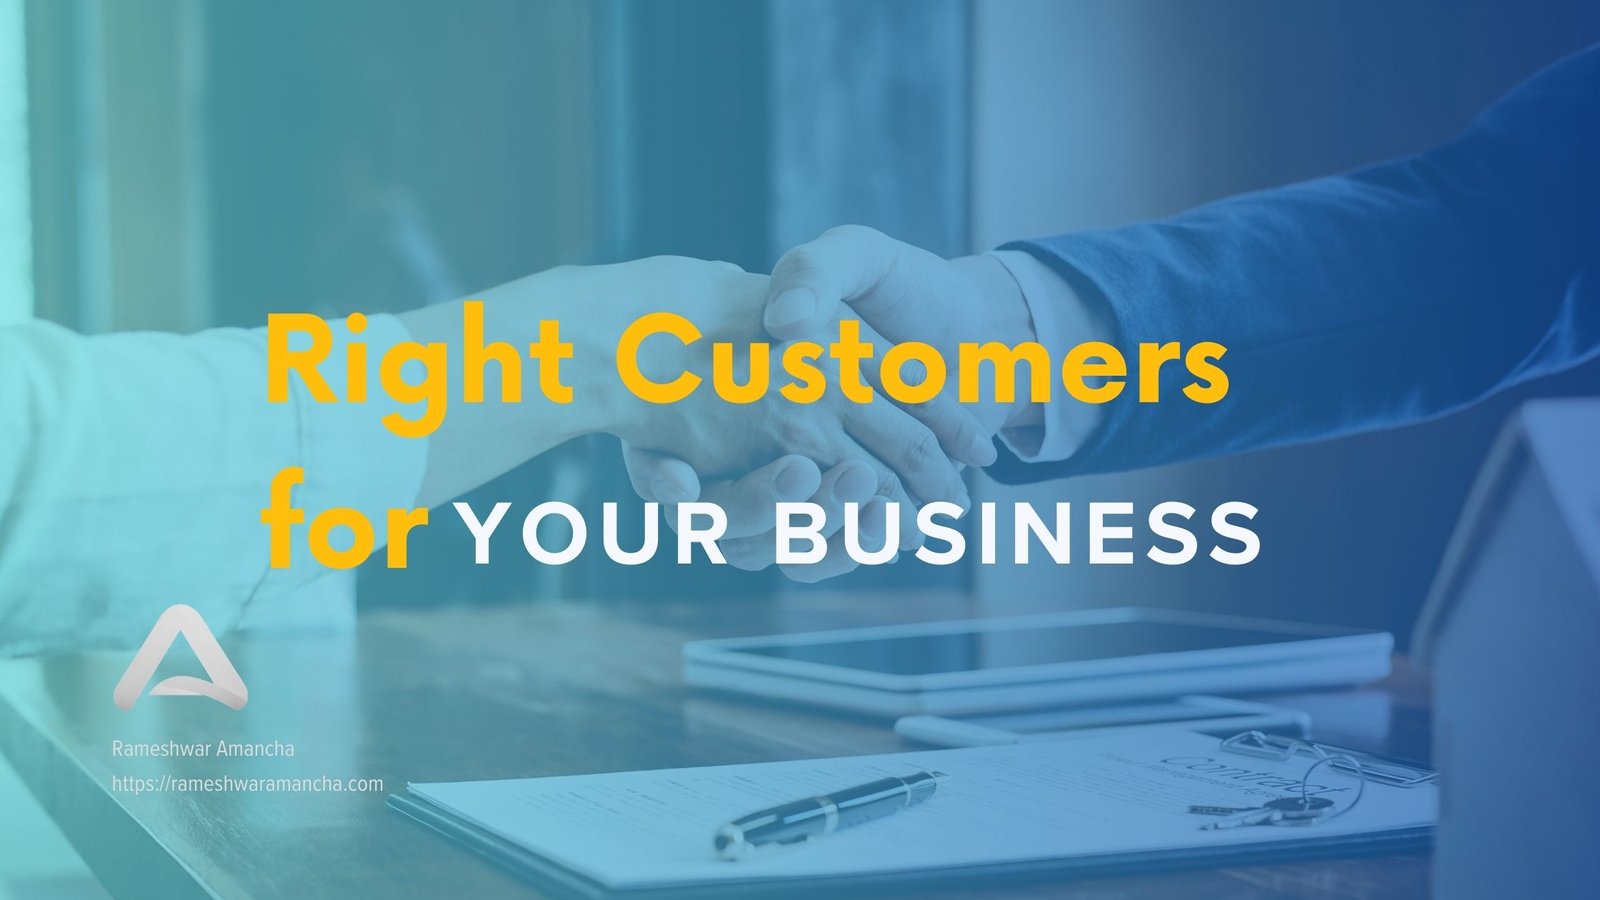 Right Customers for Your Business